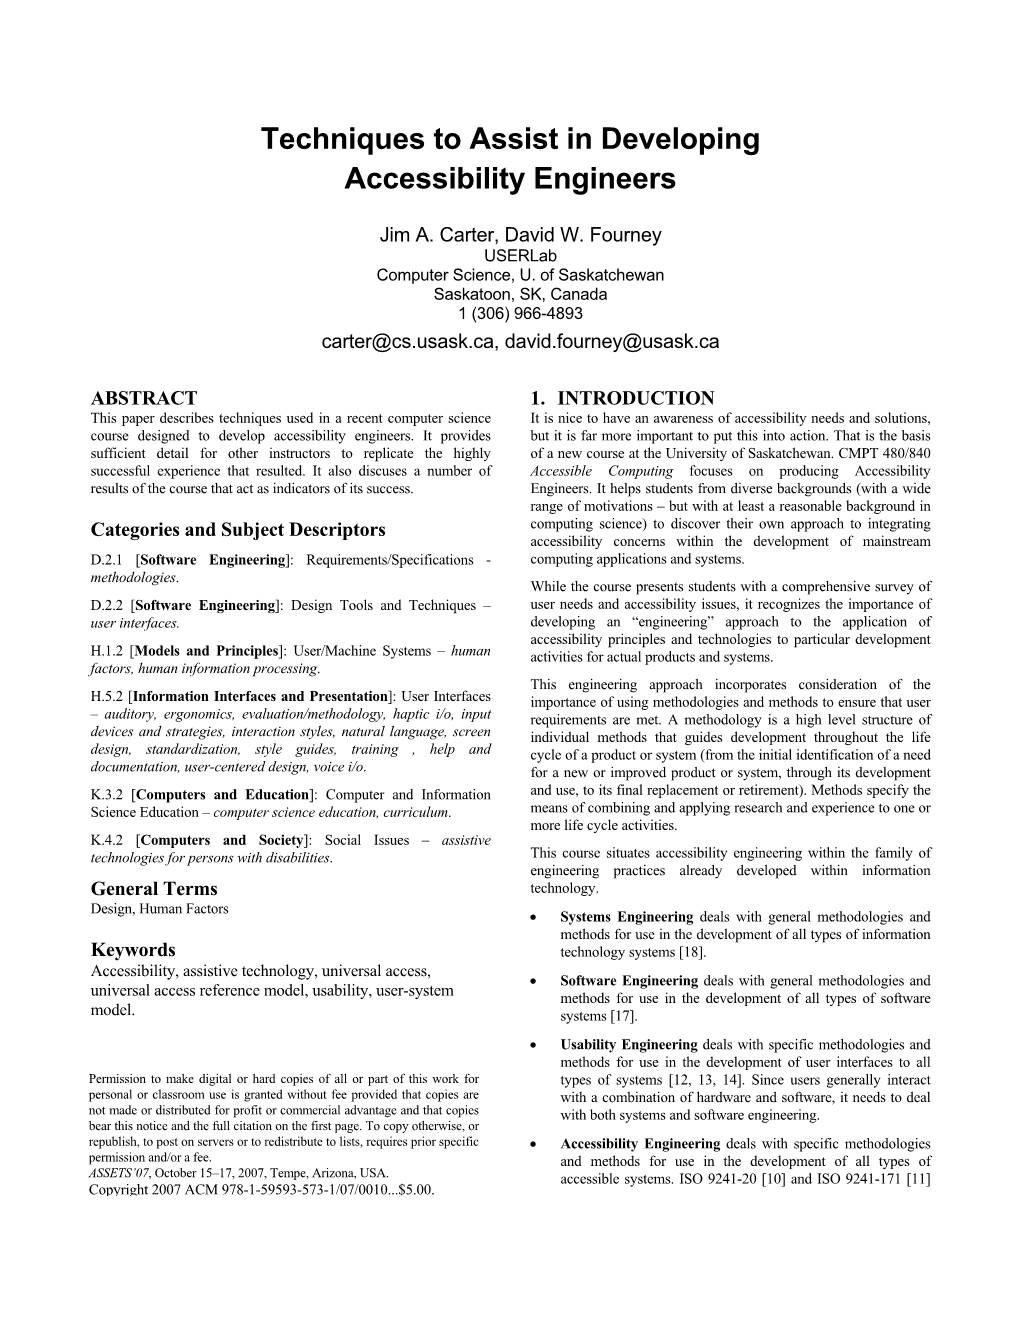 Techniques to Assist in Developing Accessibility Engineers